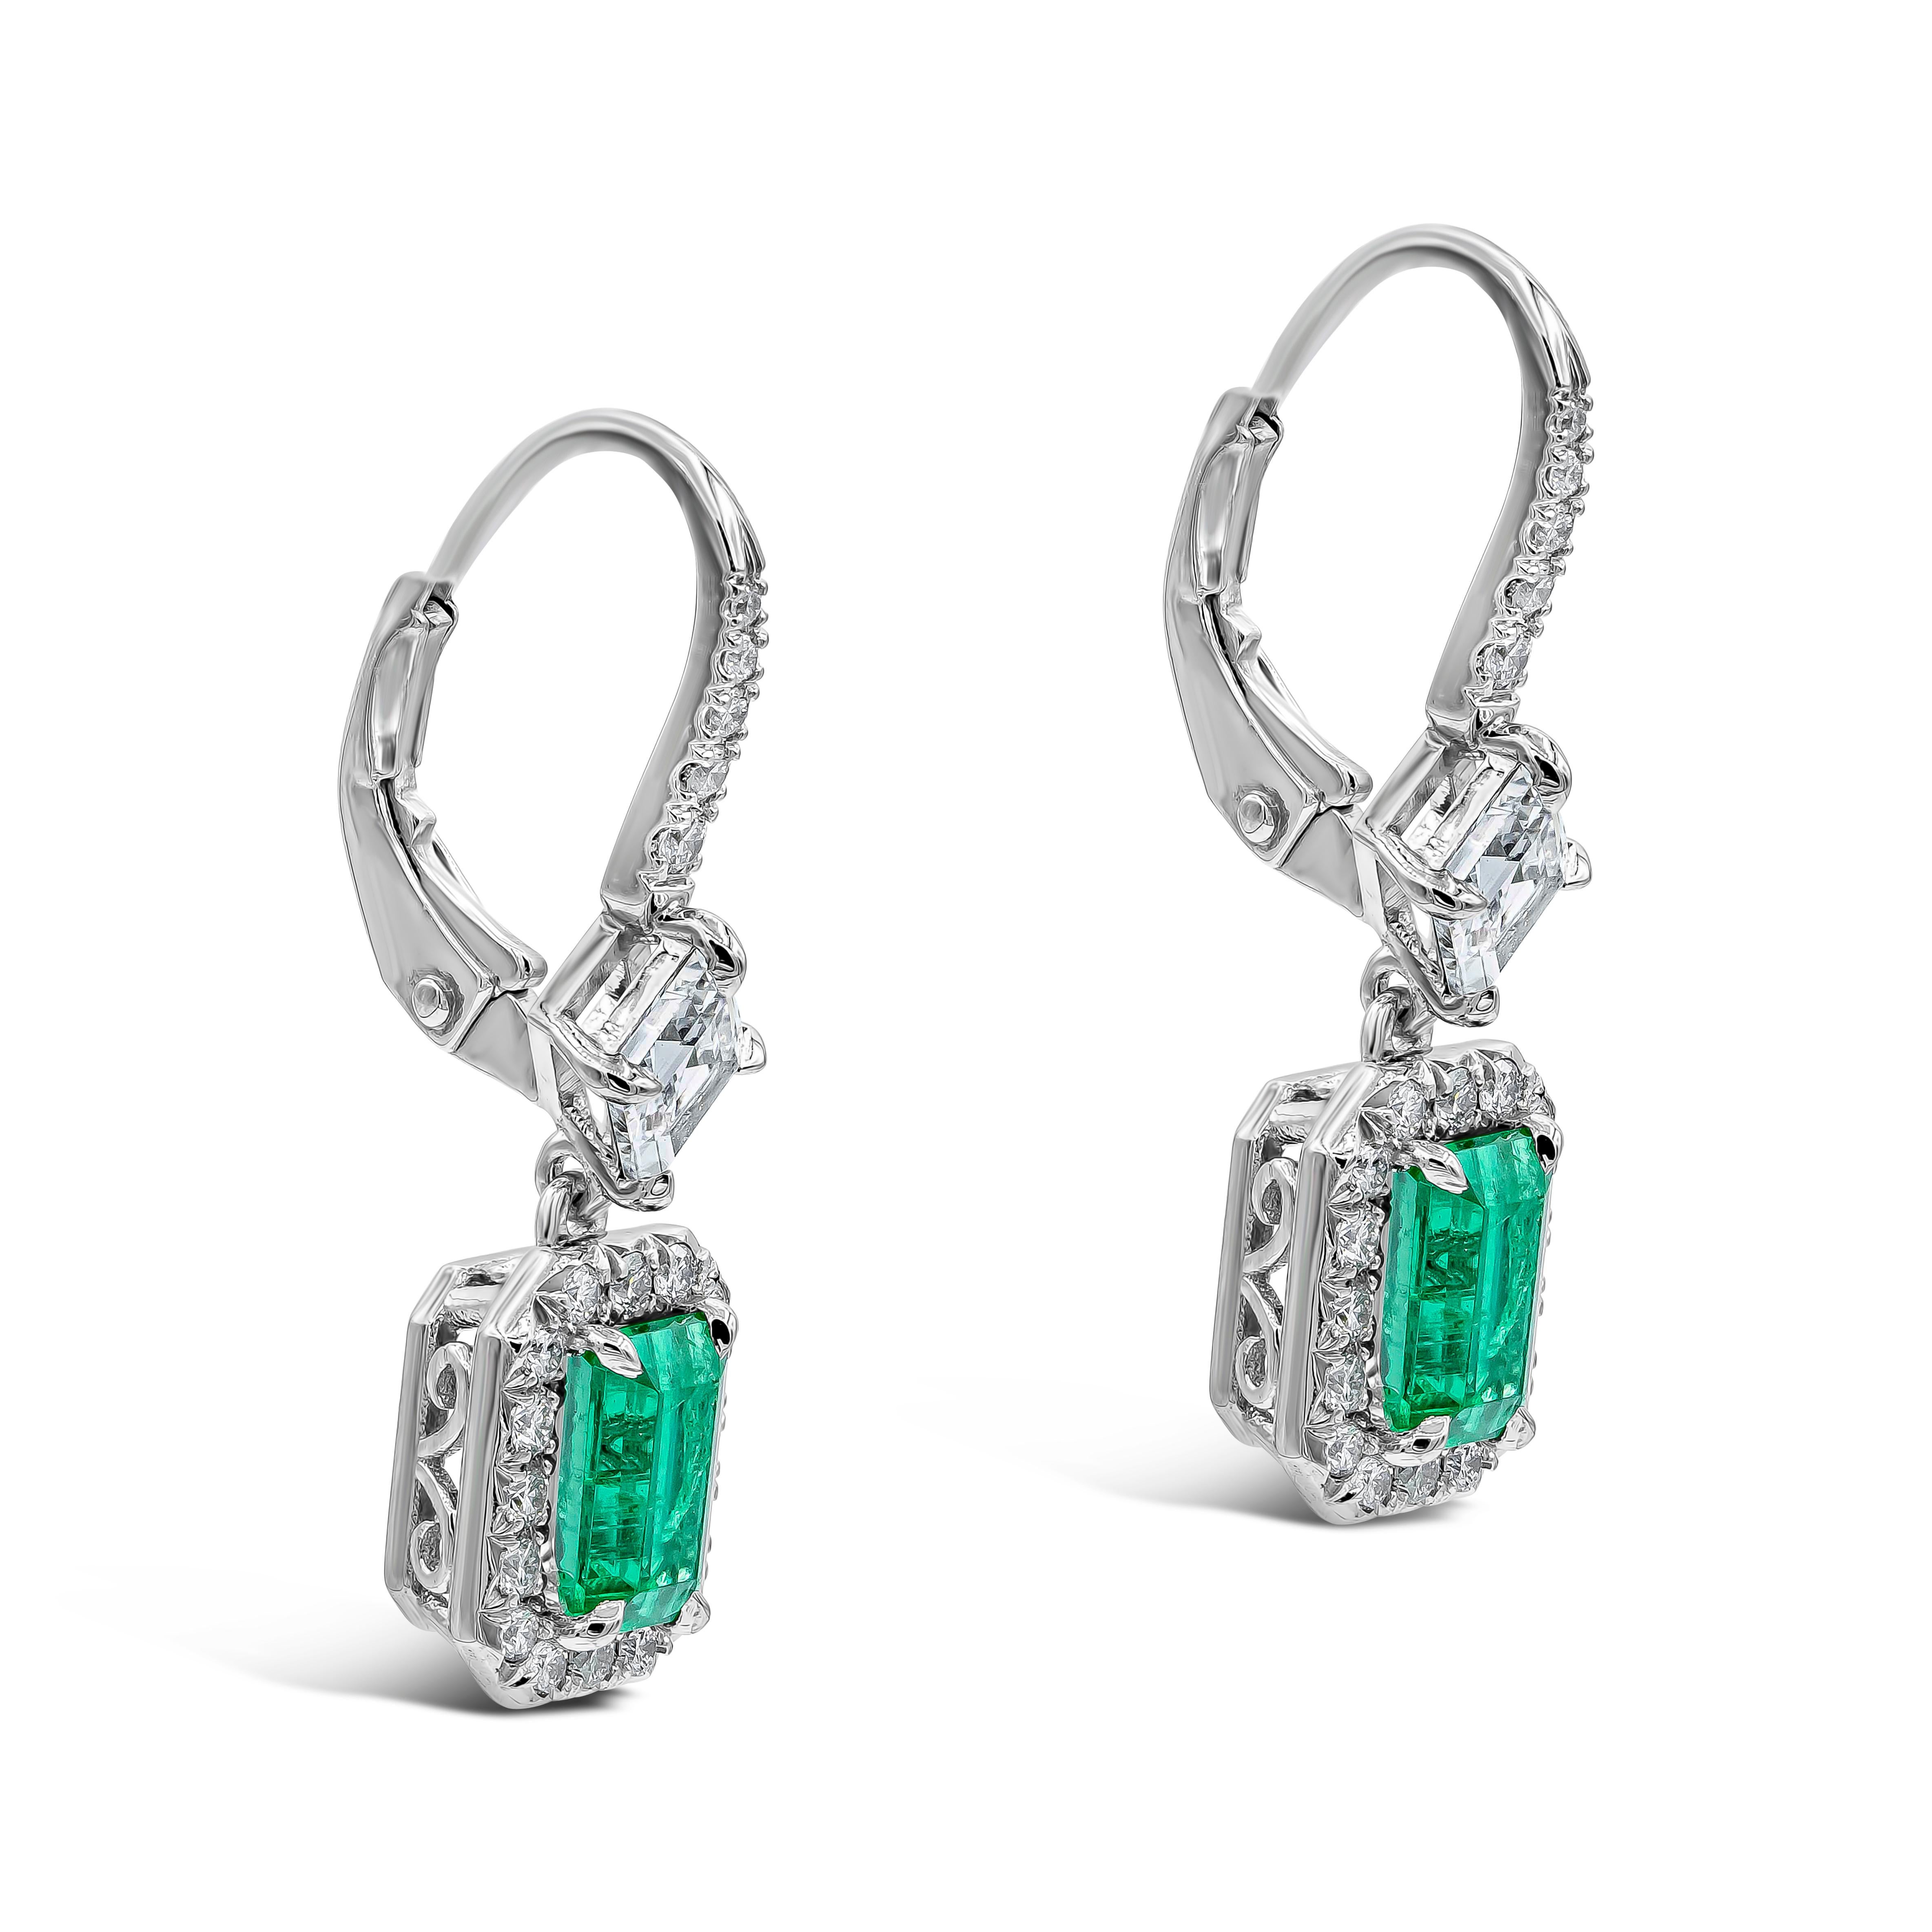 A stunning pair of dangling earrings, showcasing very fine Colombian emeralds of 1.37 carats total, set on platinum. Surrounded by a single row of round brilliant diamonds and suspended on a diamond encrusted lever-back spaced by a beautiful lozenge